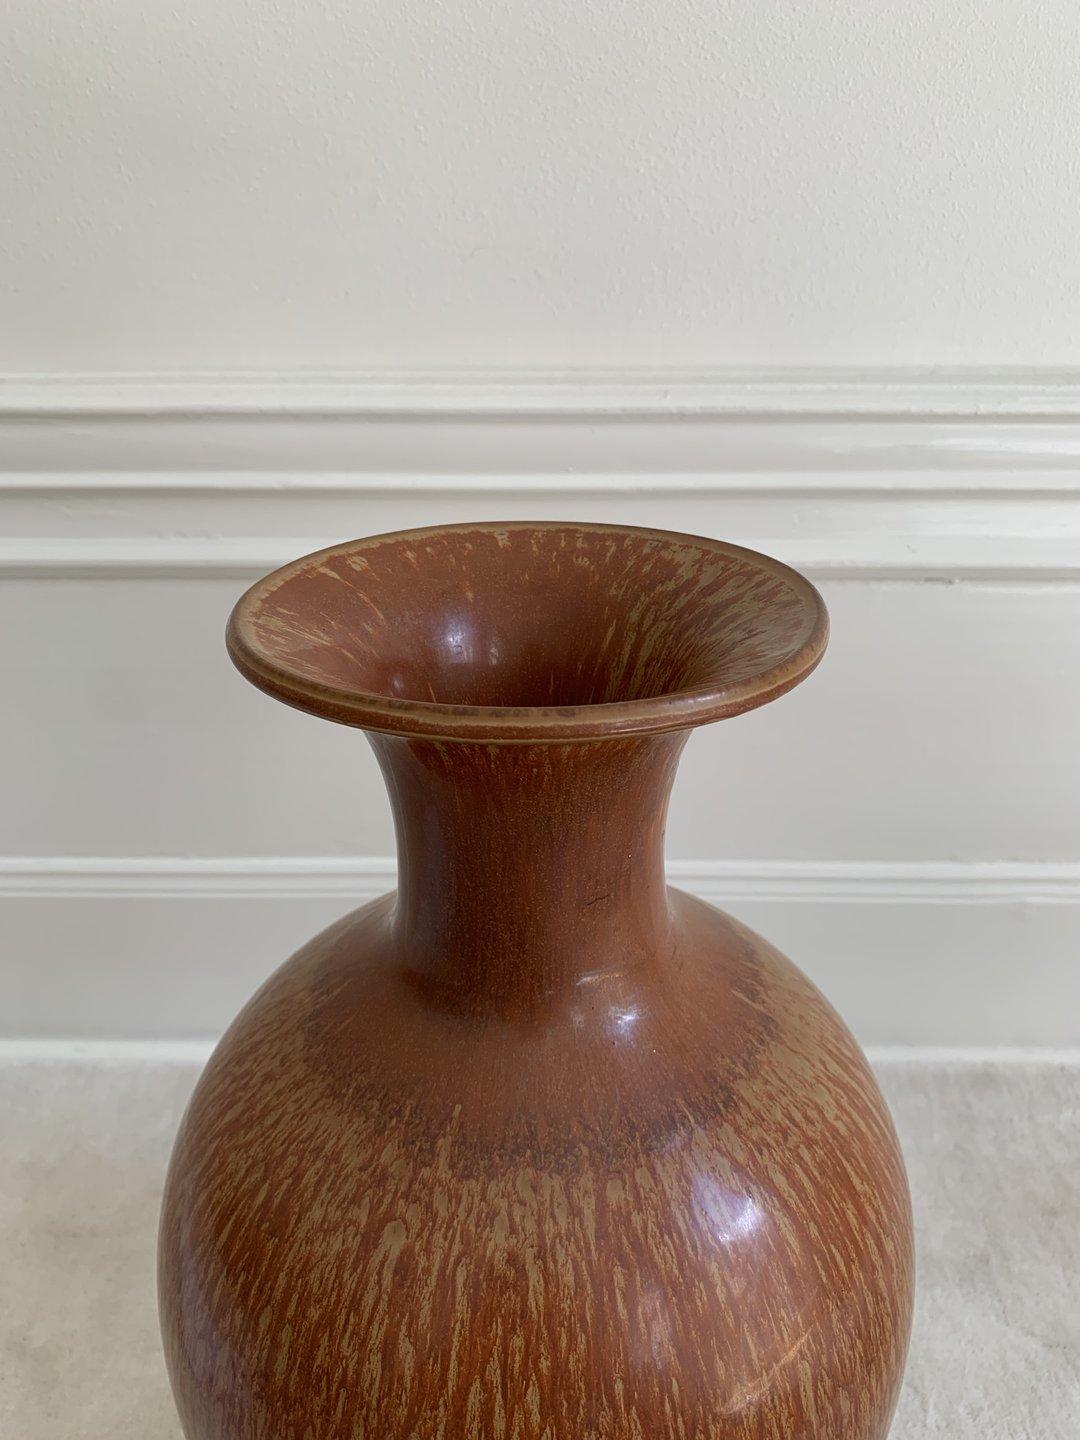 Rare floor vase by Gunnar Nylund for Rörstrand made in the 1950s. In good vintage condition.